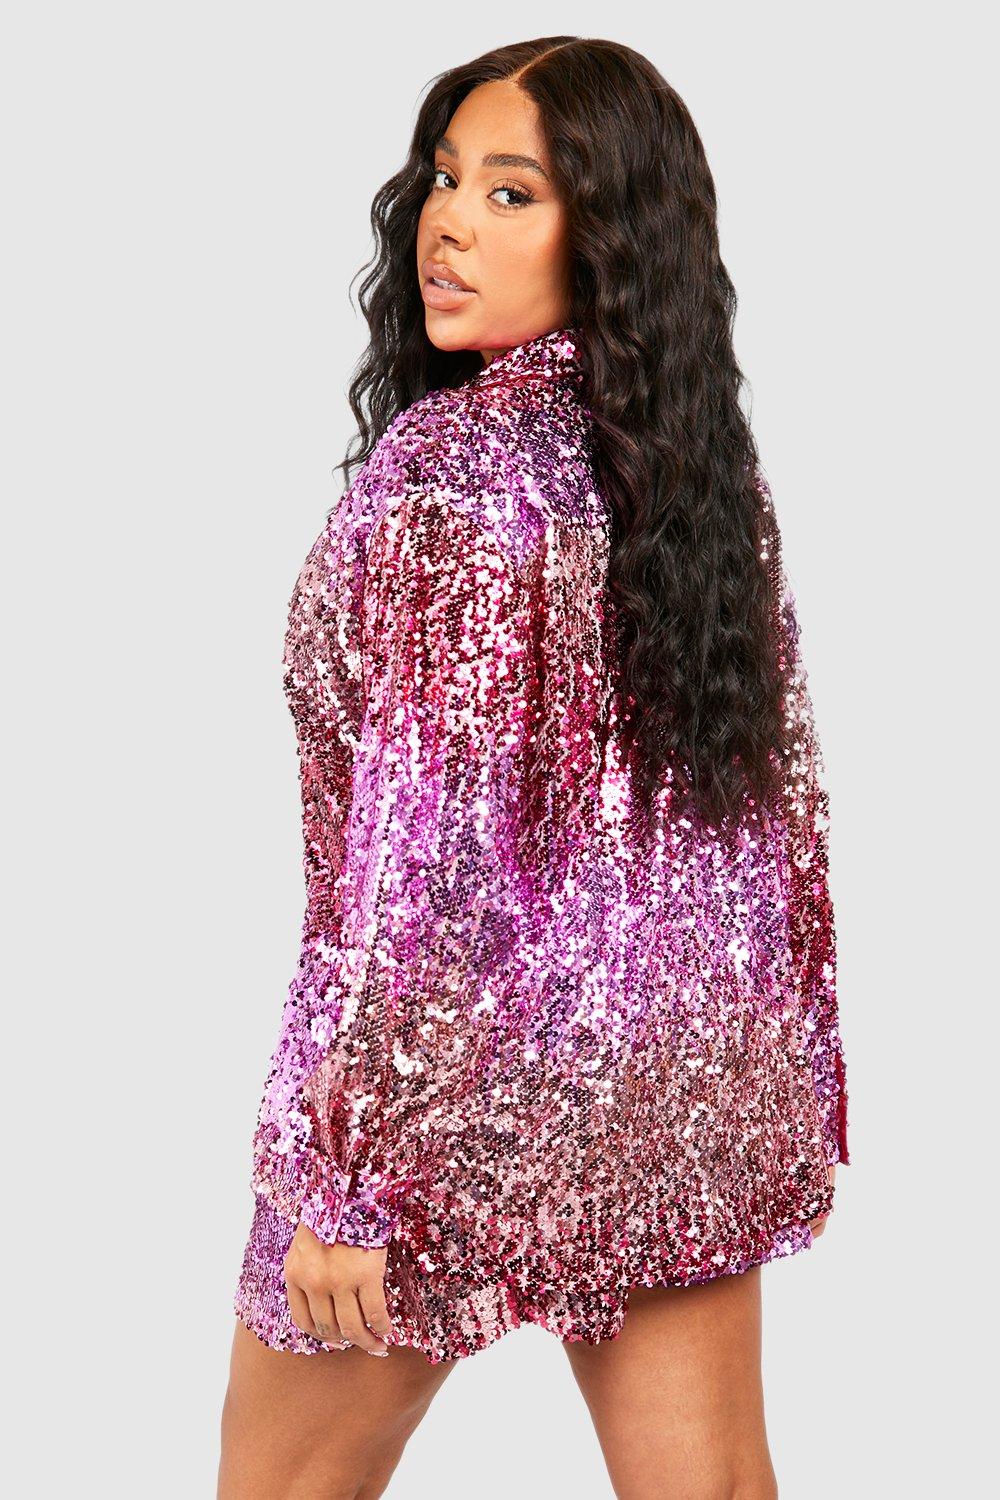 Plus Size Light Pink / Royal Sequin Jersey OSFM Size XL-3XL Jack and Jill  of America 